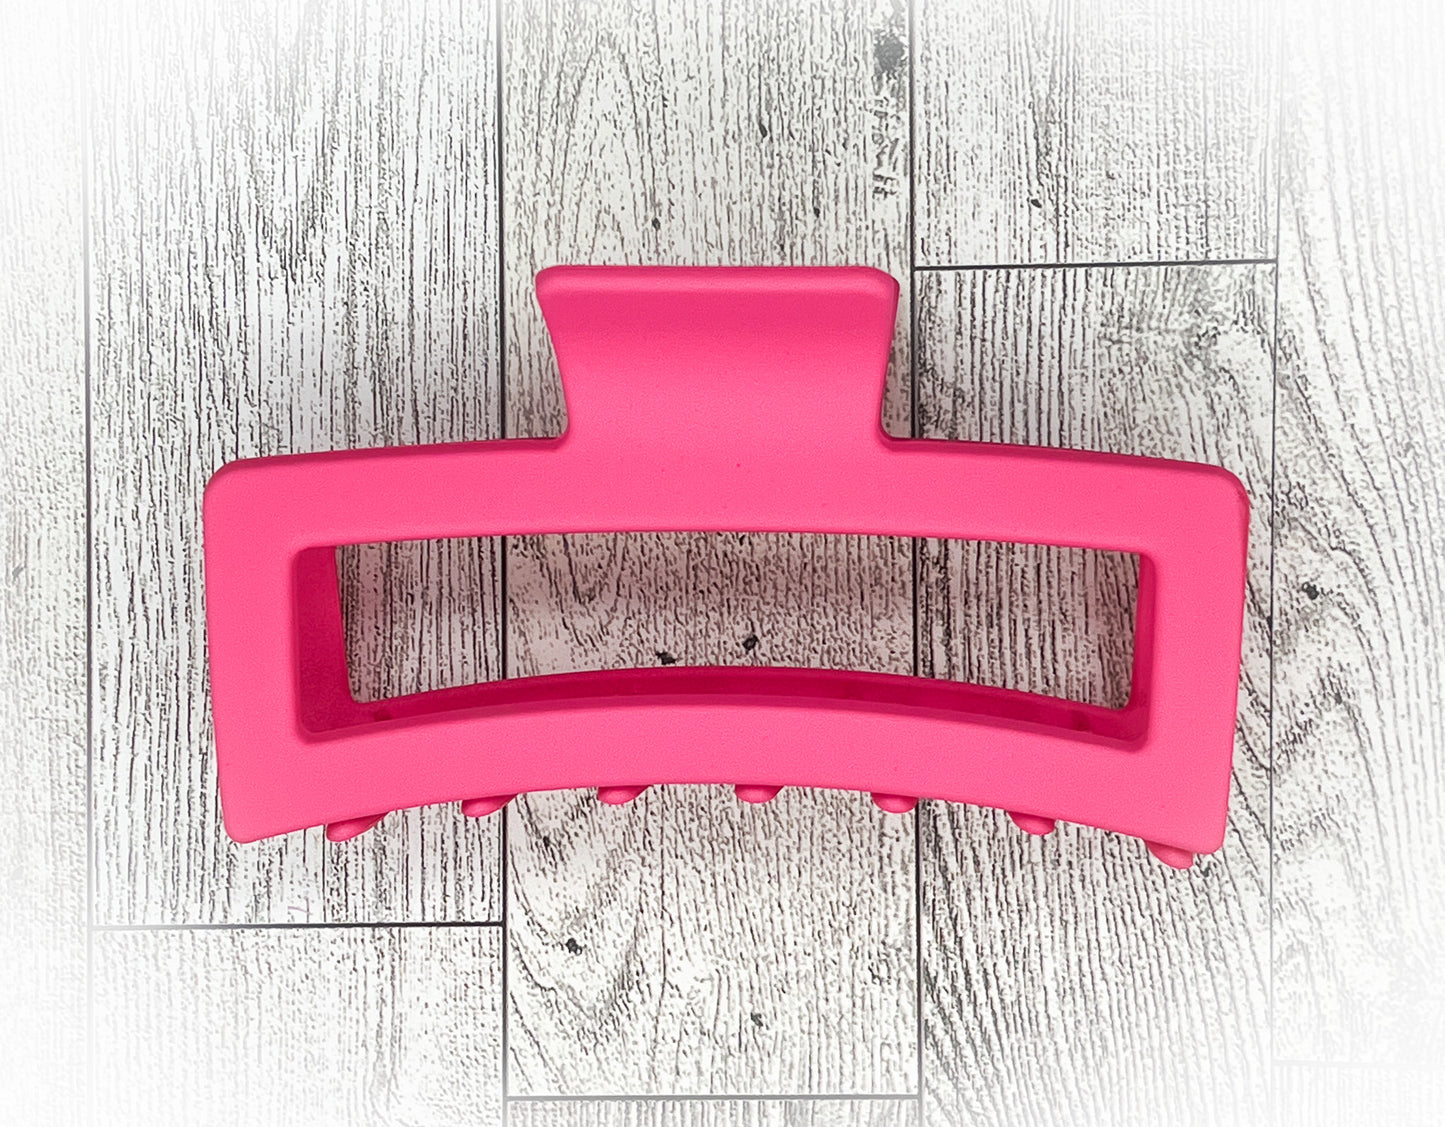 Matte Raspberry Pink Hair Claw Clip - Rectangular shape - 4. 5 inches in length. Great for Braids, twists, long hair, thick hair, and coarse hair.